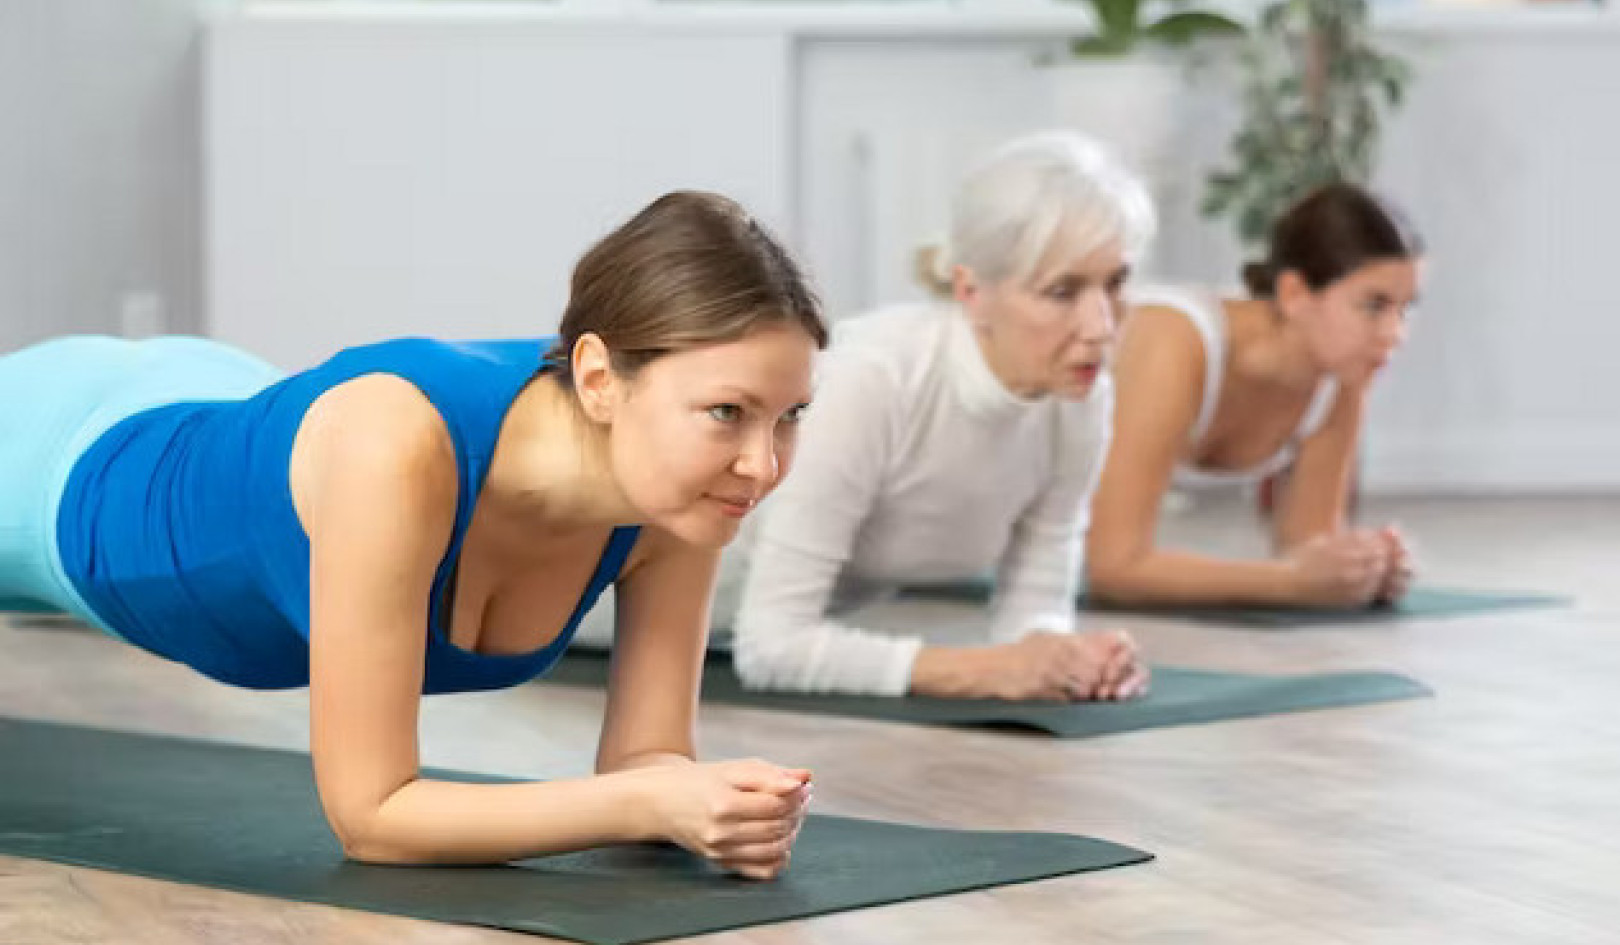 Isometric Exercises for Lowering Blood Pressure and More: Planks and Wall Sits Proven Effective